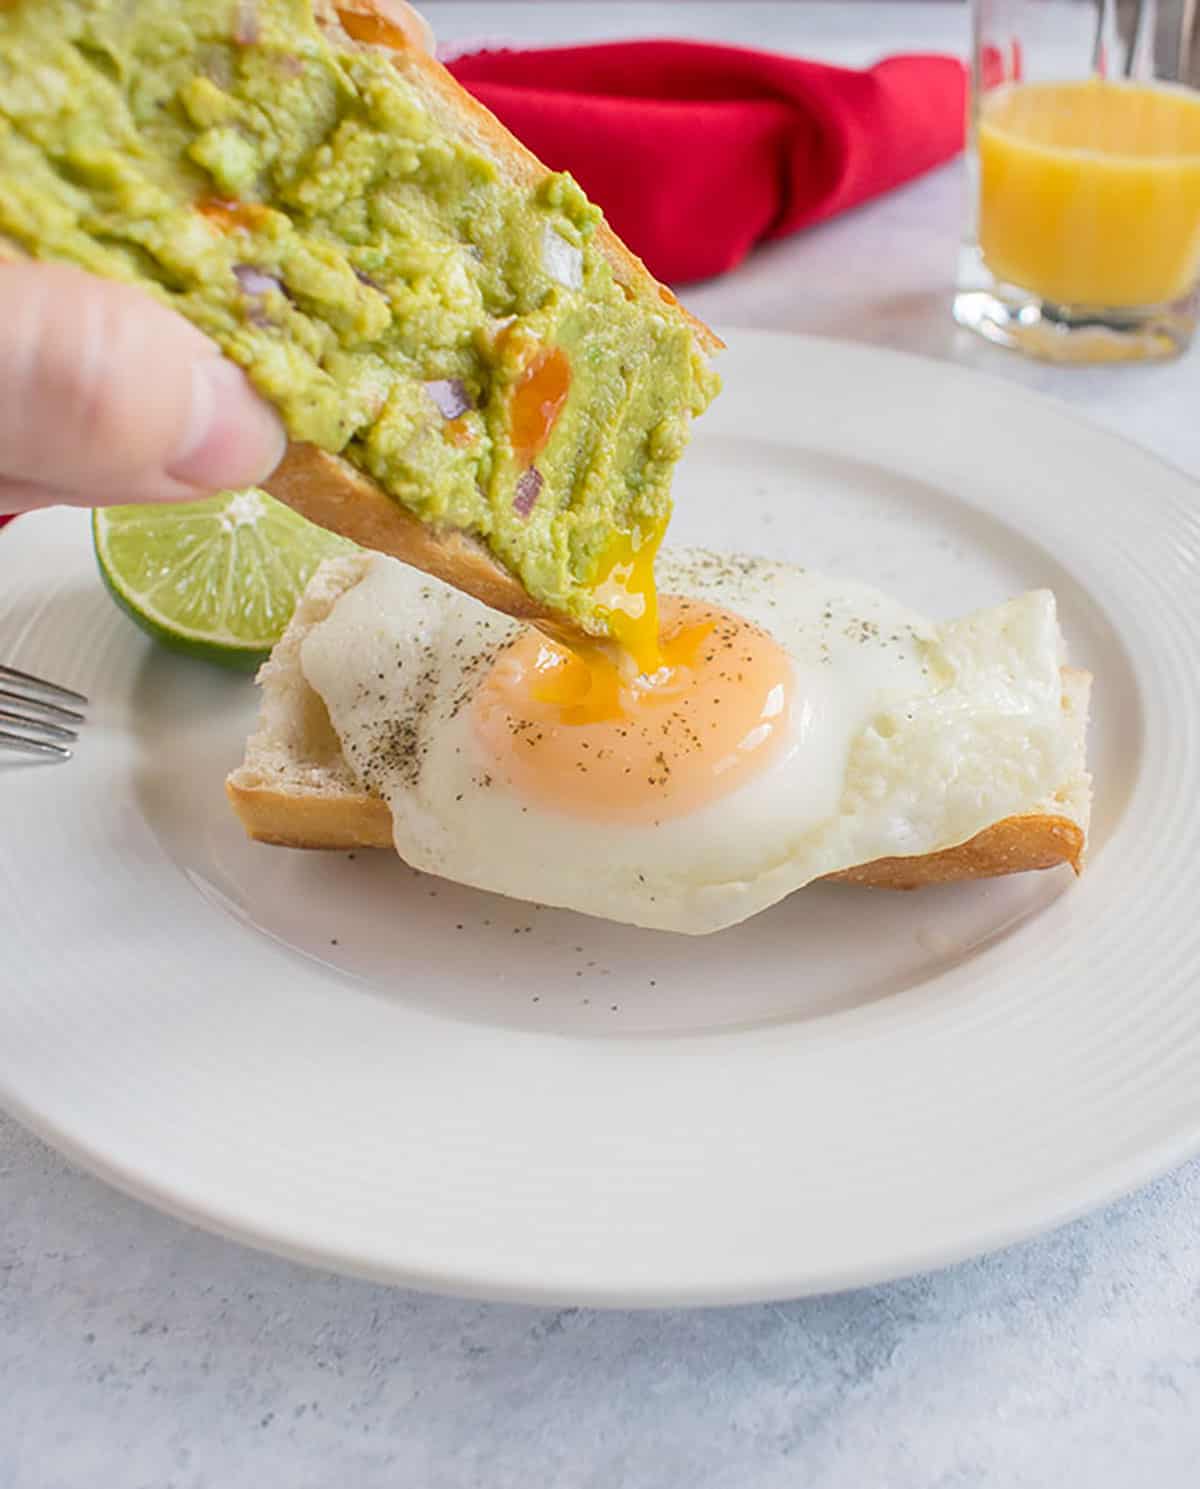 dipping guacamole toast in yolk of basted egg 